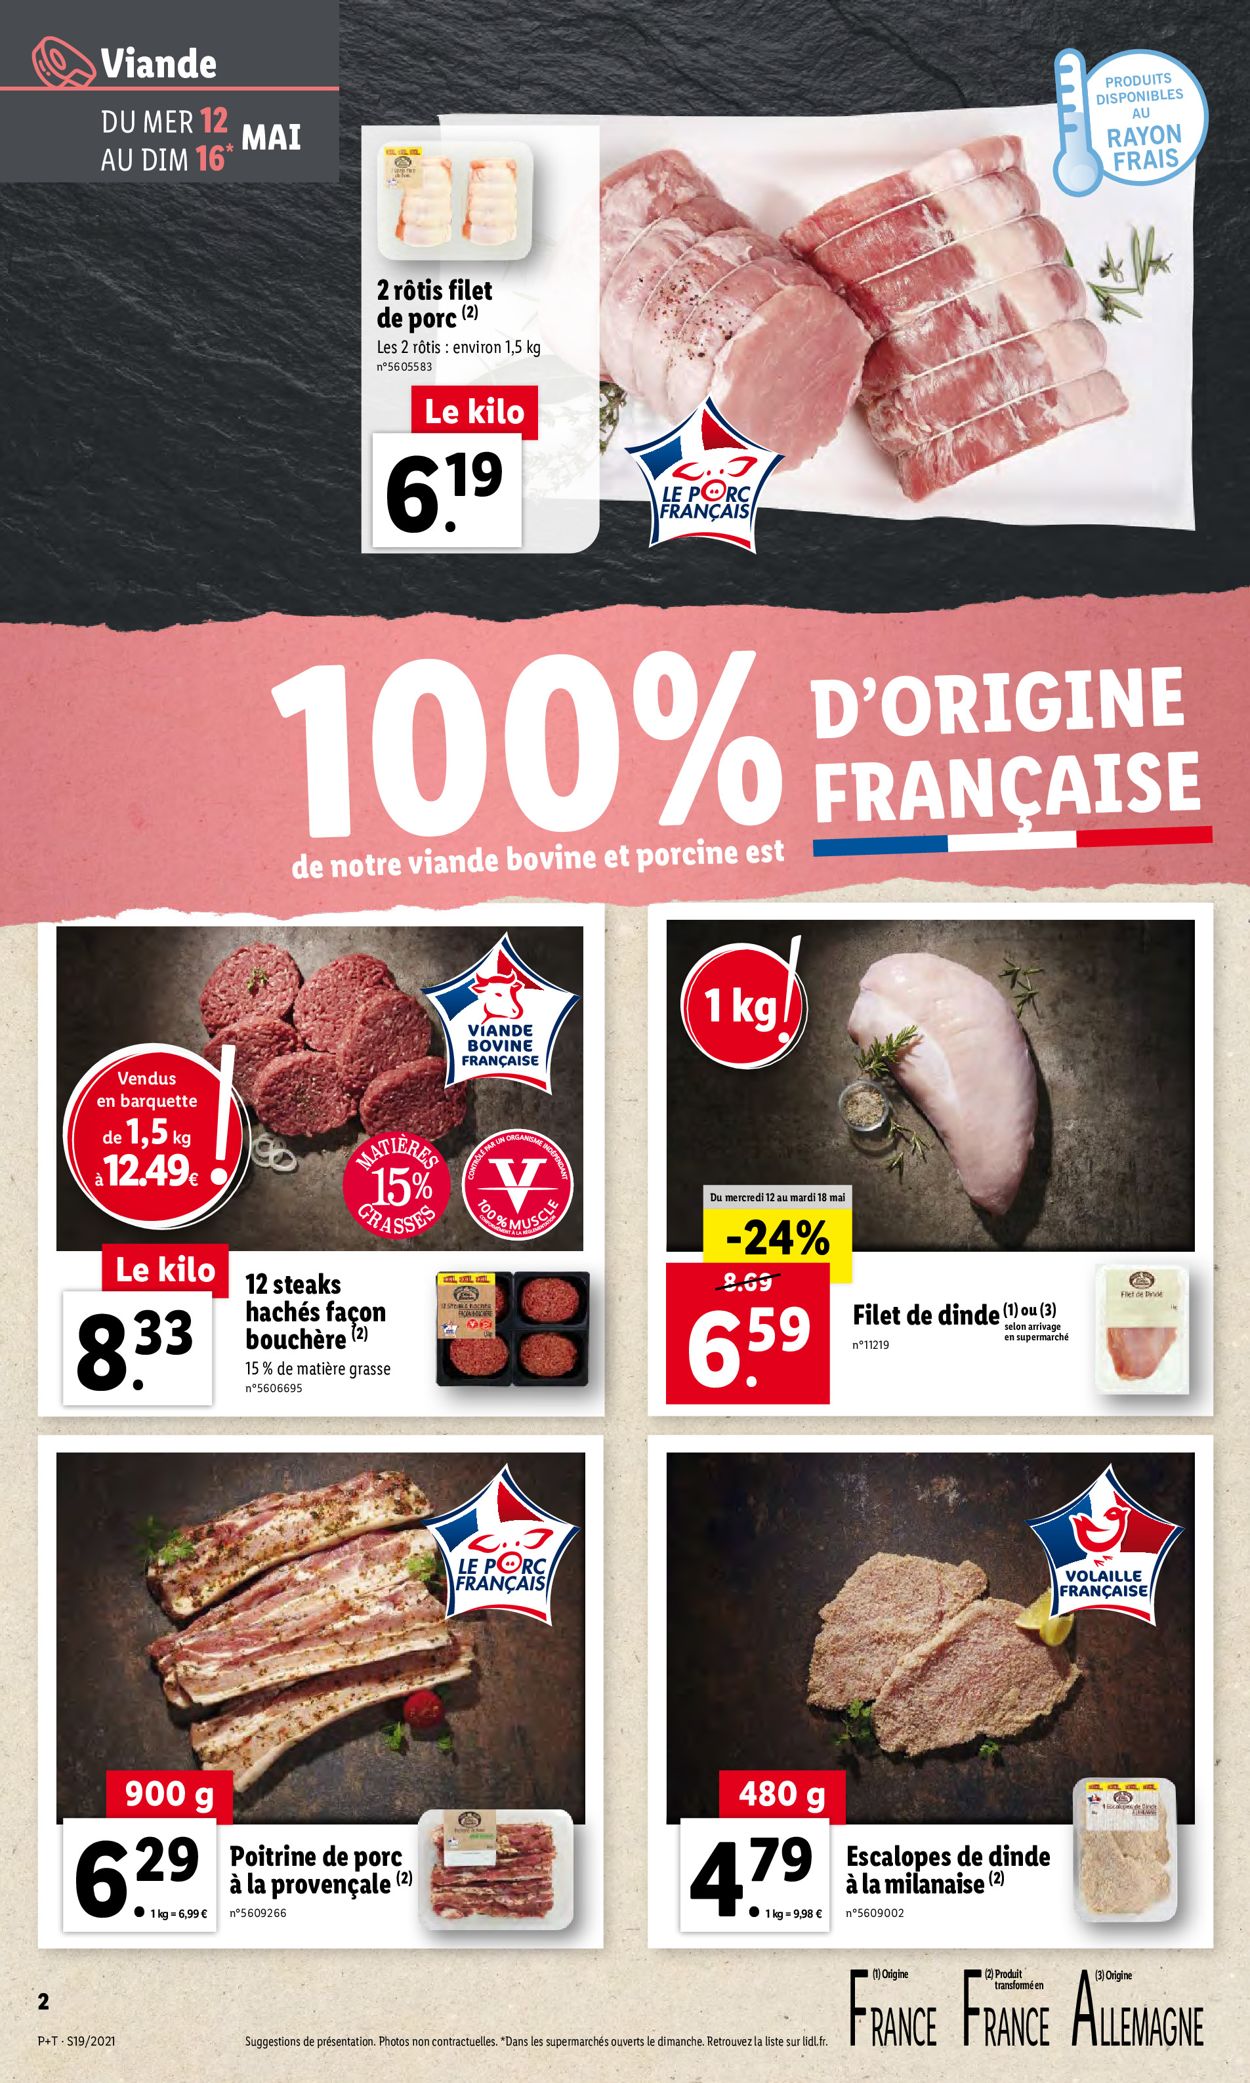 Lidl Catalogue - 12.05-18.05.2021 (Page 2)